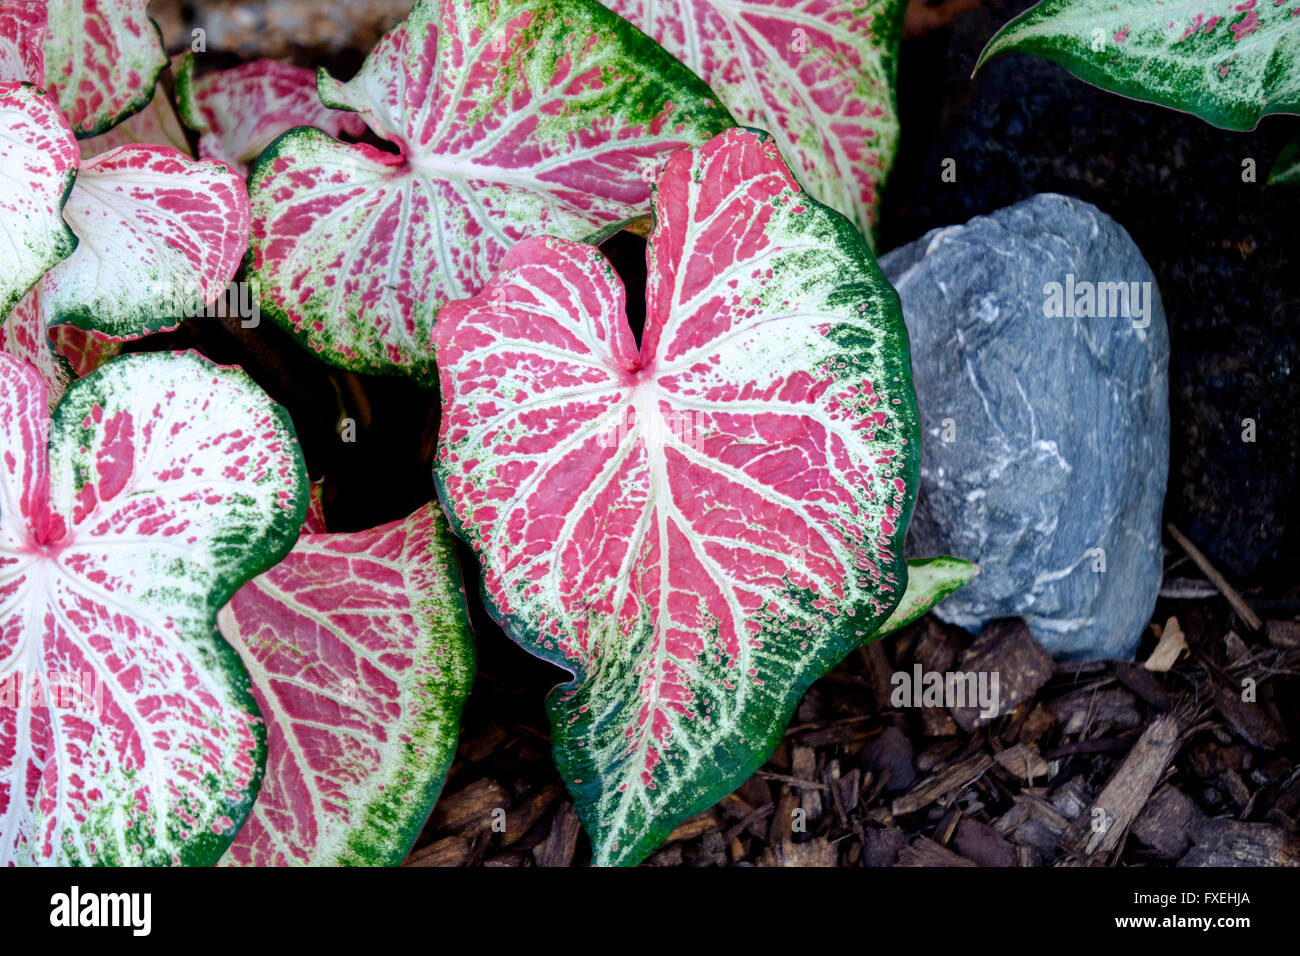 Pink and green Caladiums, araceae, Gingerland variety, in a garden bed with decorative stones. Oklahoma, USA. Stock Photo